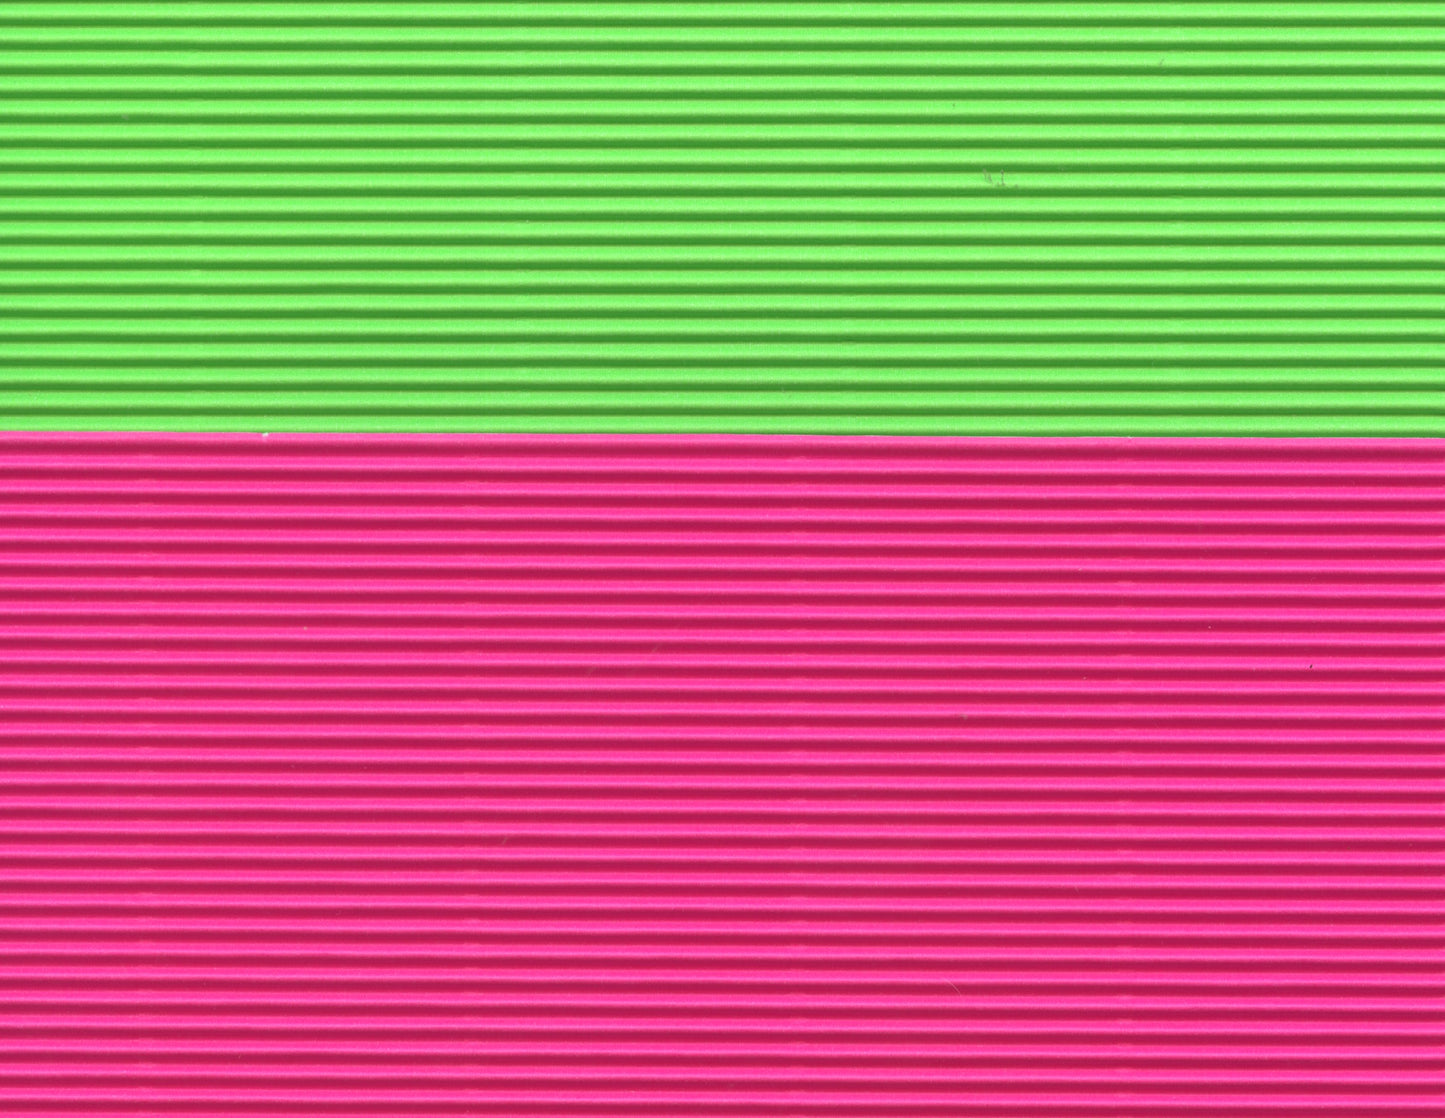 Corrugated A4 Card - Fluro Green and Pink - 4 pack